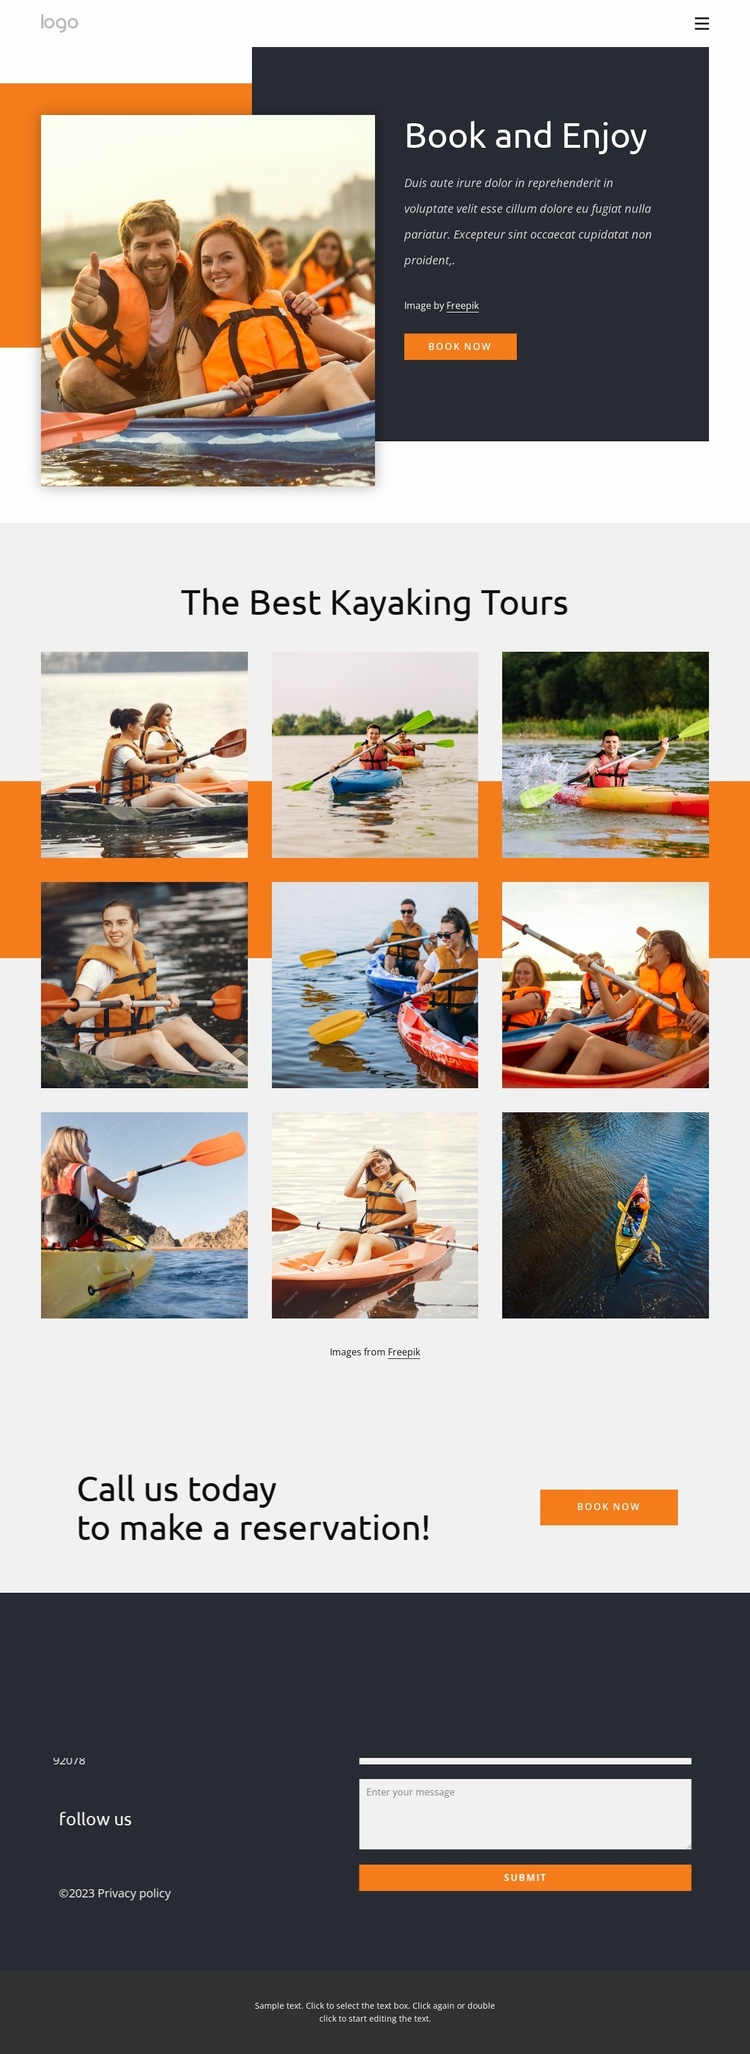 Kayaking tours and holidays eCommerce Template